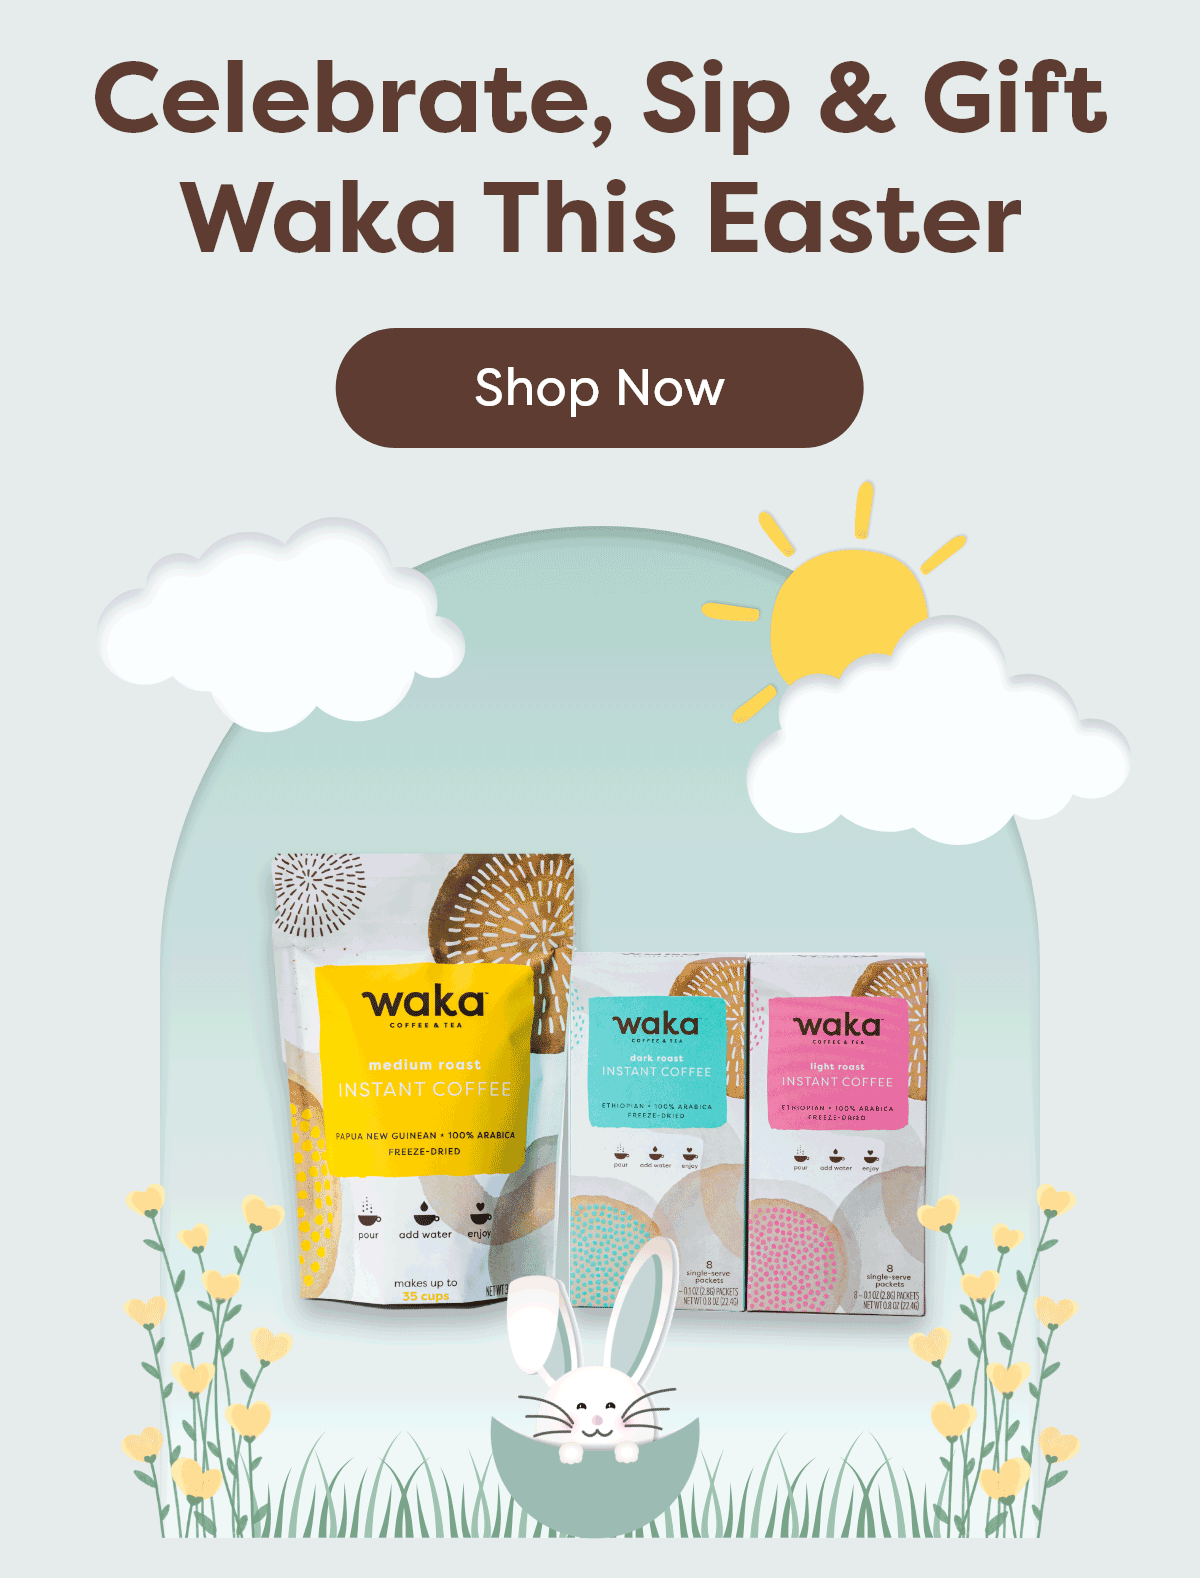 Celebrate, Sip & Gift Waka This Easter